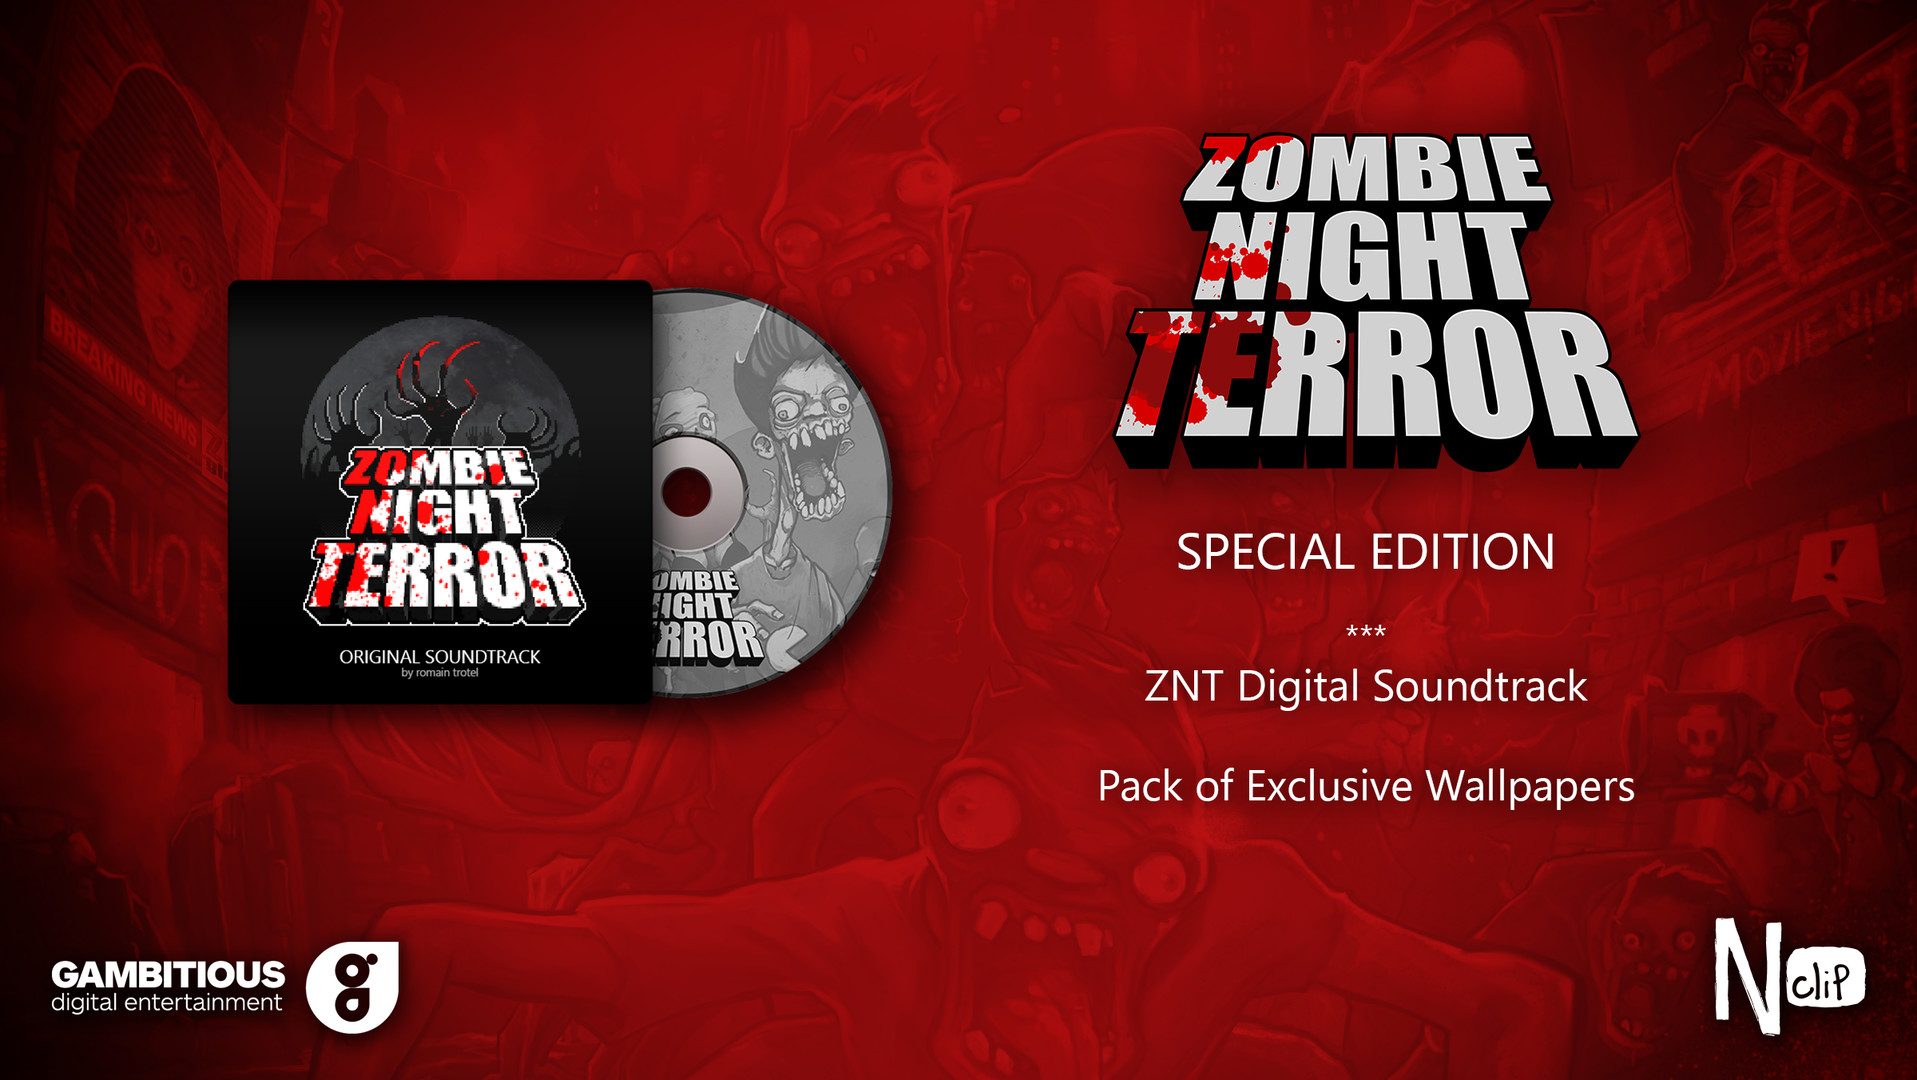 Zombie Night Terror - Soundtrack/Special Edition Upgrade Featured Screenshot #1